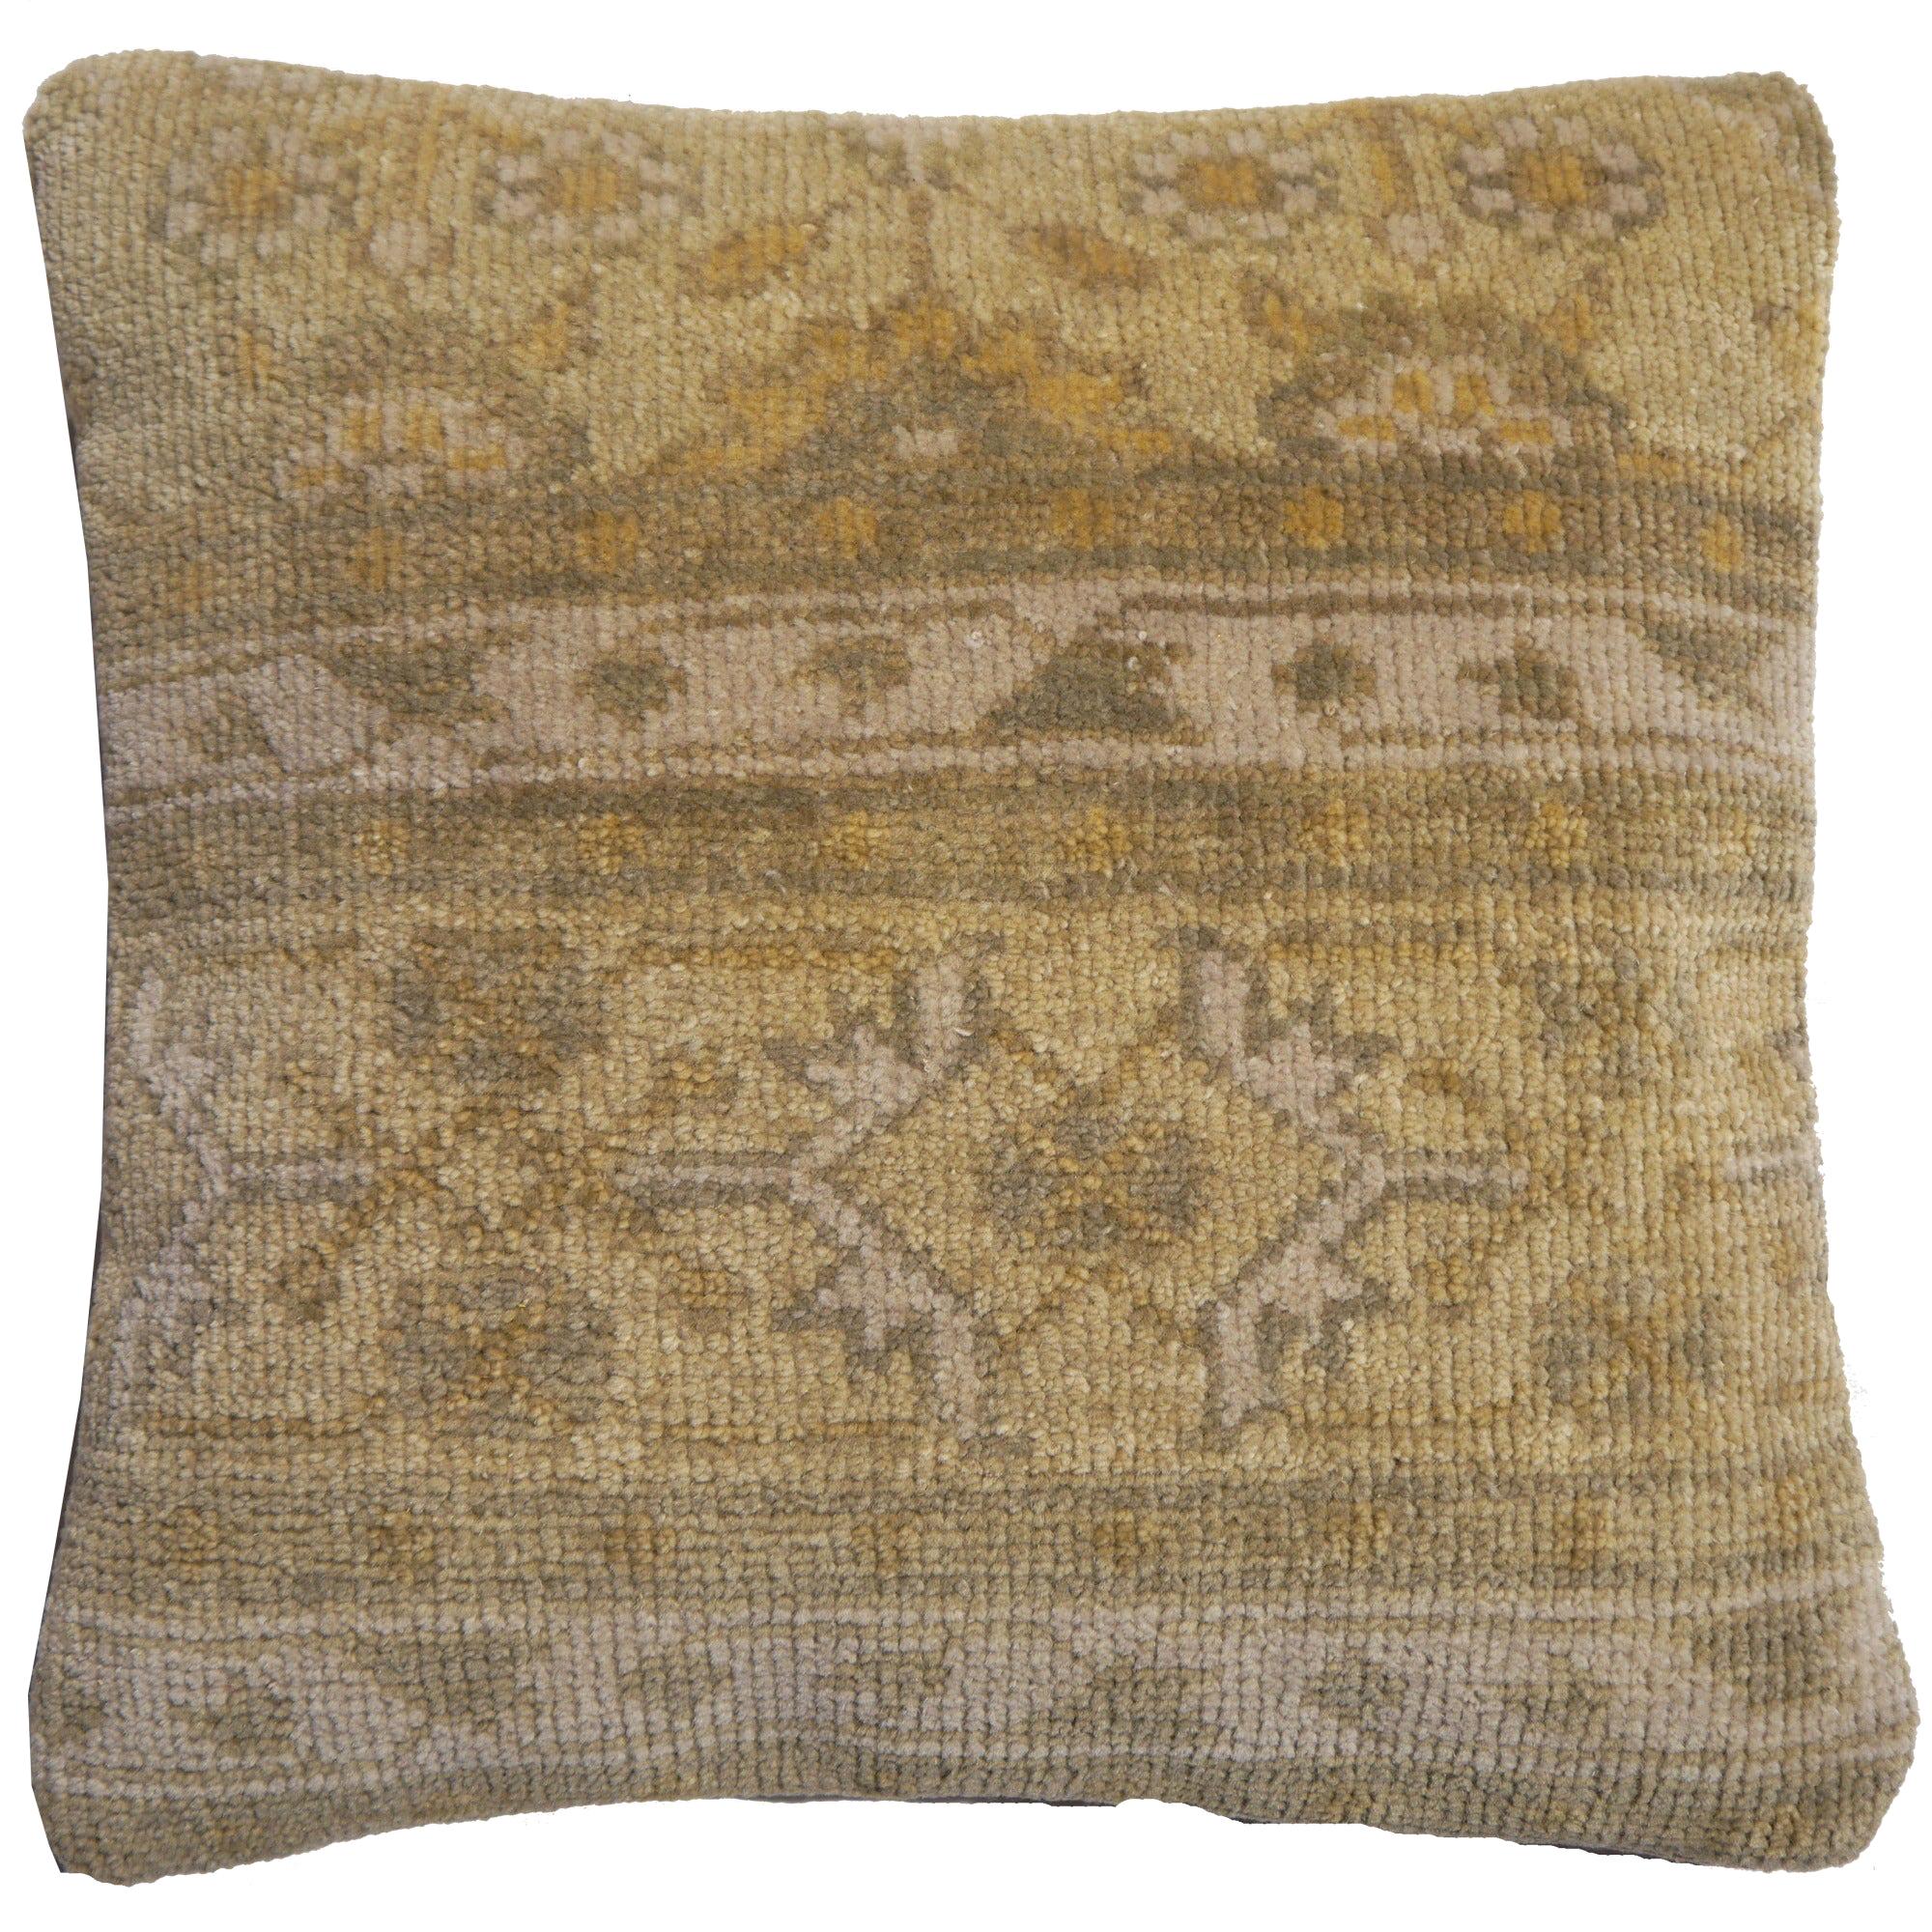 Khotan Samarkand Decorative Hand Knotted Rug Pillow Cover For Sale